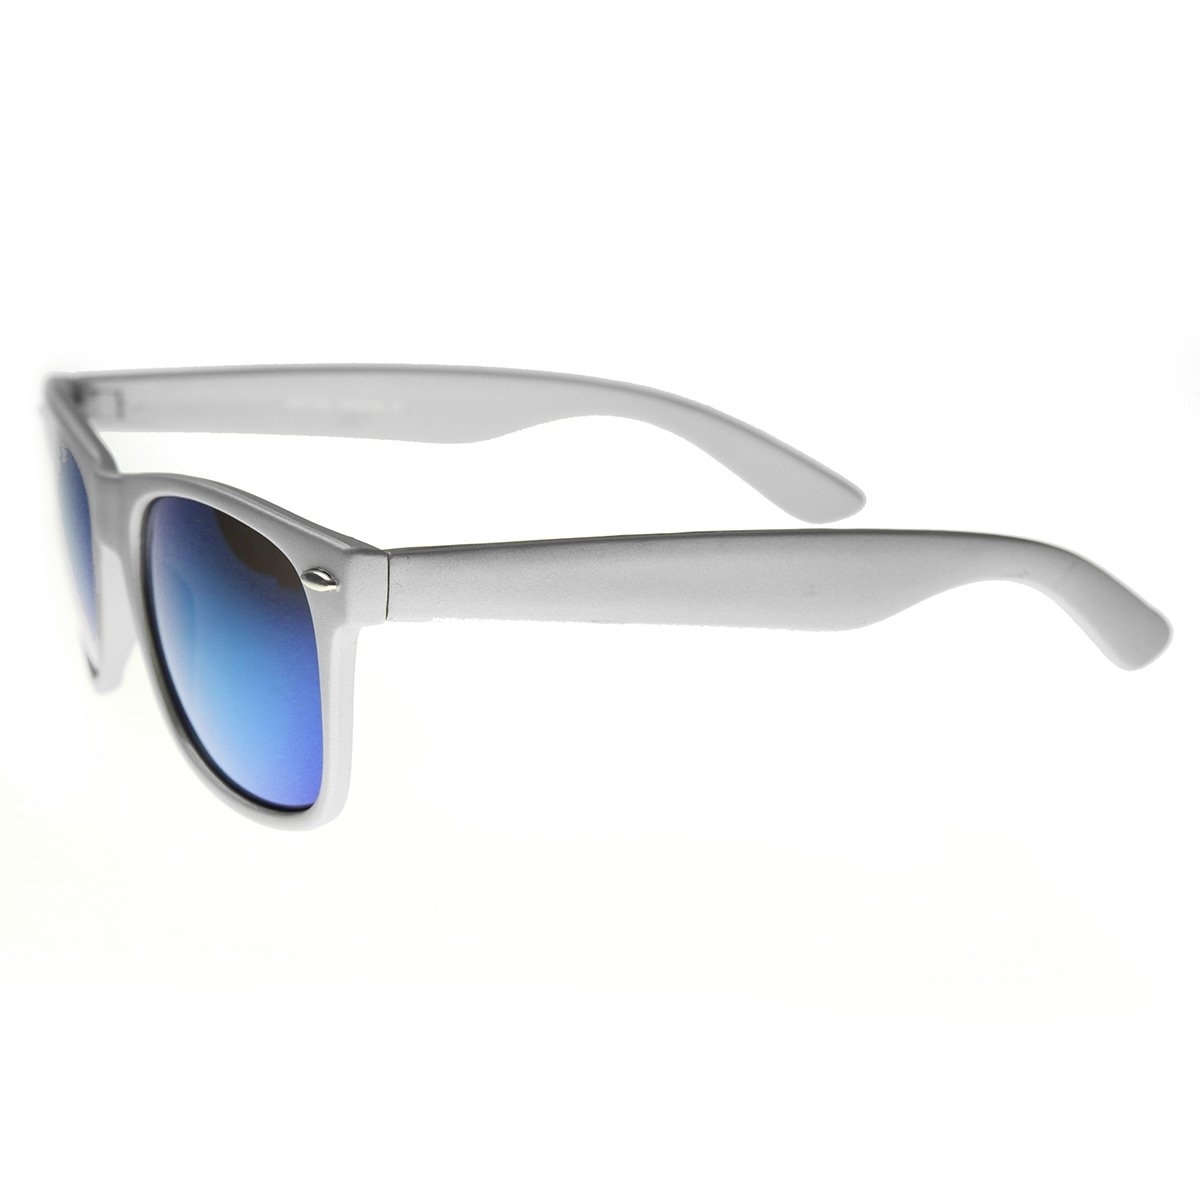 Classic Horn Rimmed Sunglasses With Flash Mirro Lens - Blue Ice